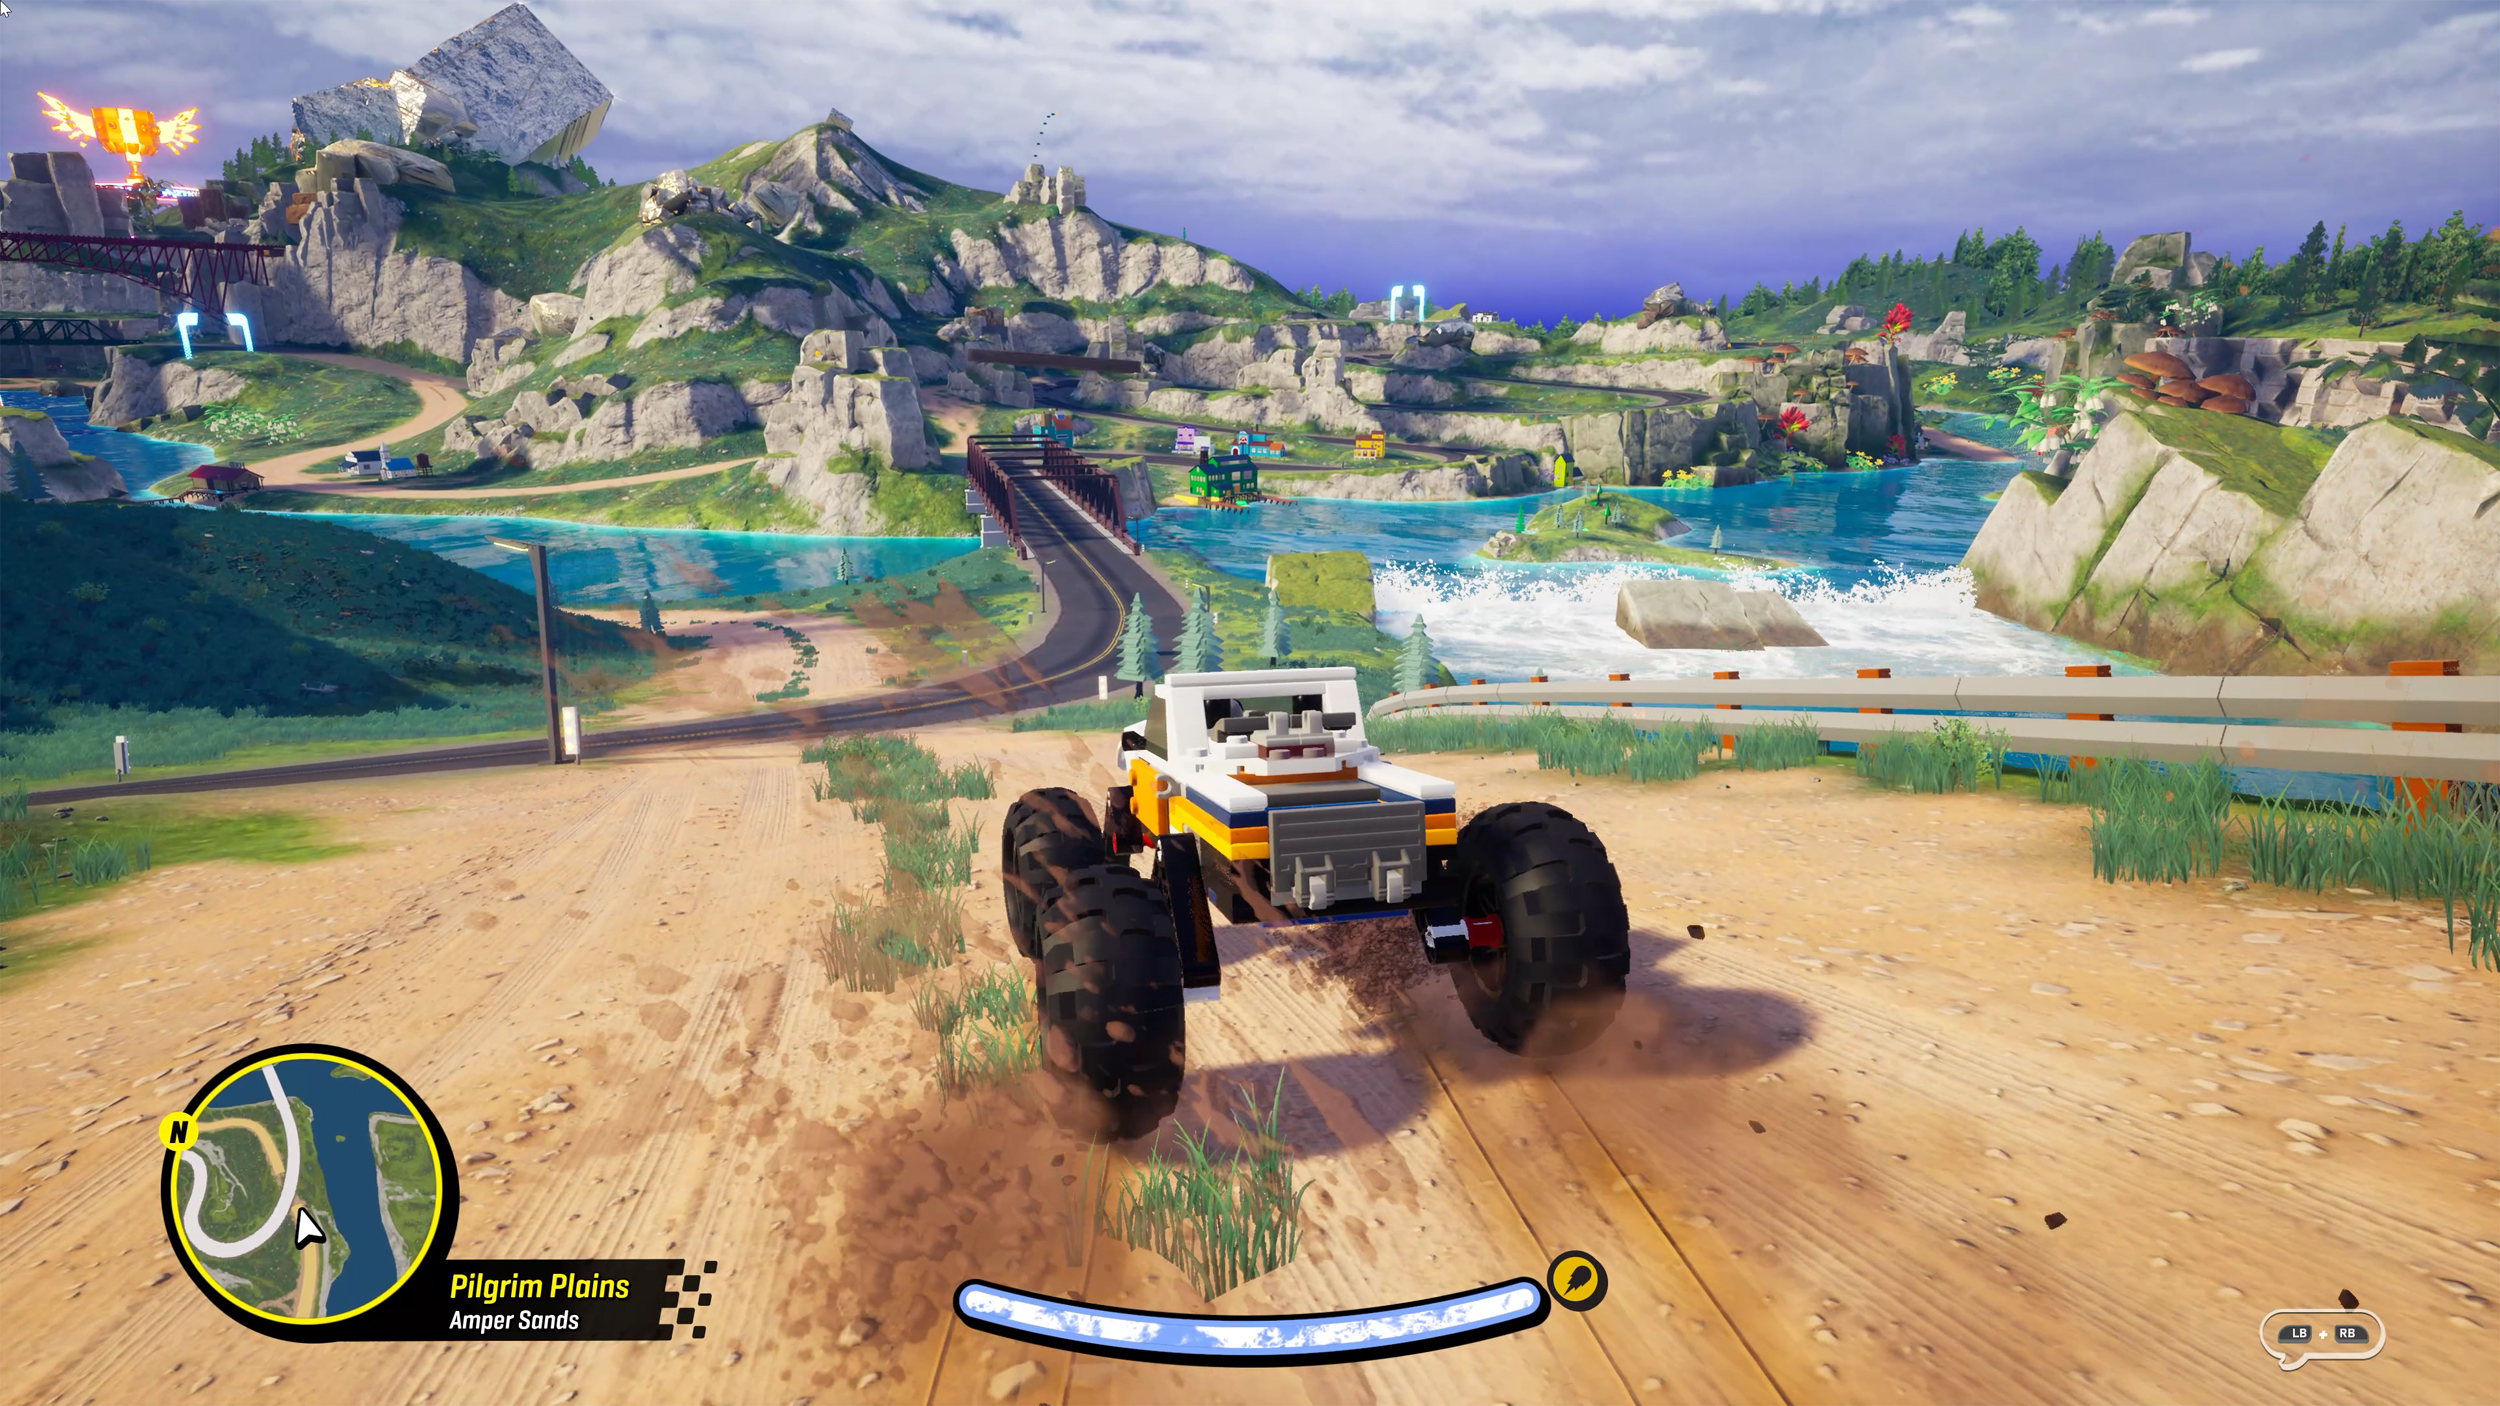 Crazy Chicken Kart 2 PS4 Review: A Poor Yet Fascinating Racer